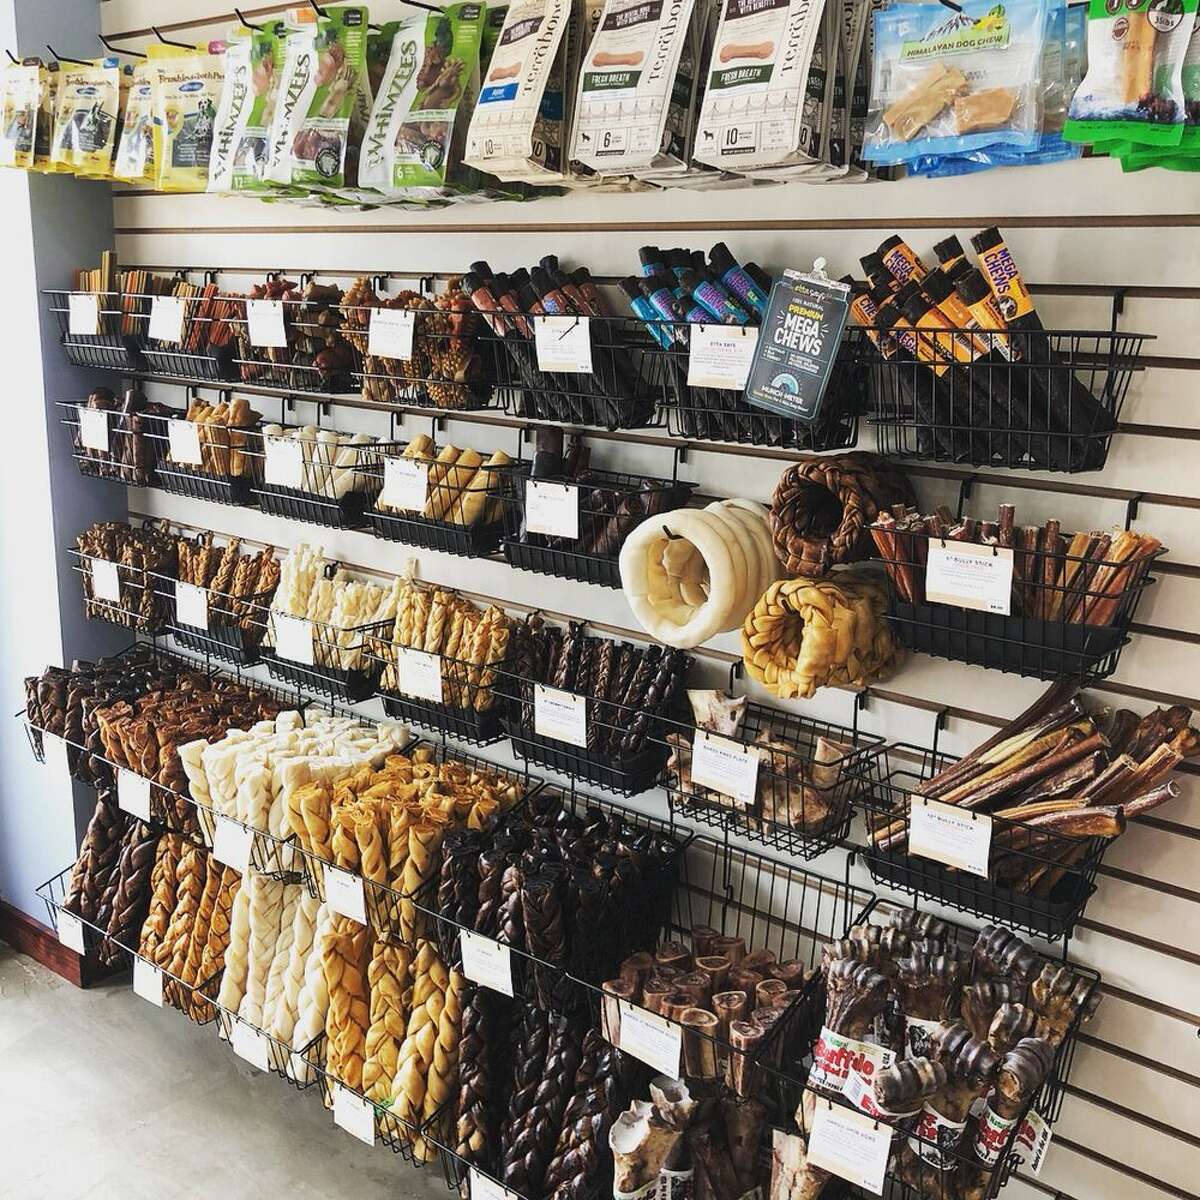 Three Dog Bakery2402 Rice Boulevard, HoustonThree Dog Bakery offers all natural baked treats including seasonal baked goods and birthday cakes. Pups can pick a treat from the chew wall or bone bar featured in the store. Courtesy Yelp/Three Dog Bakery 